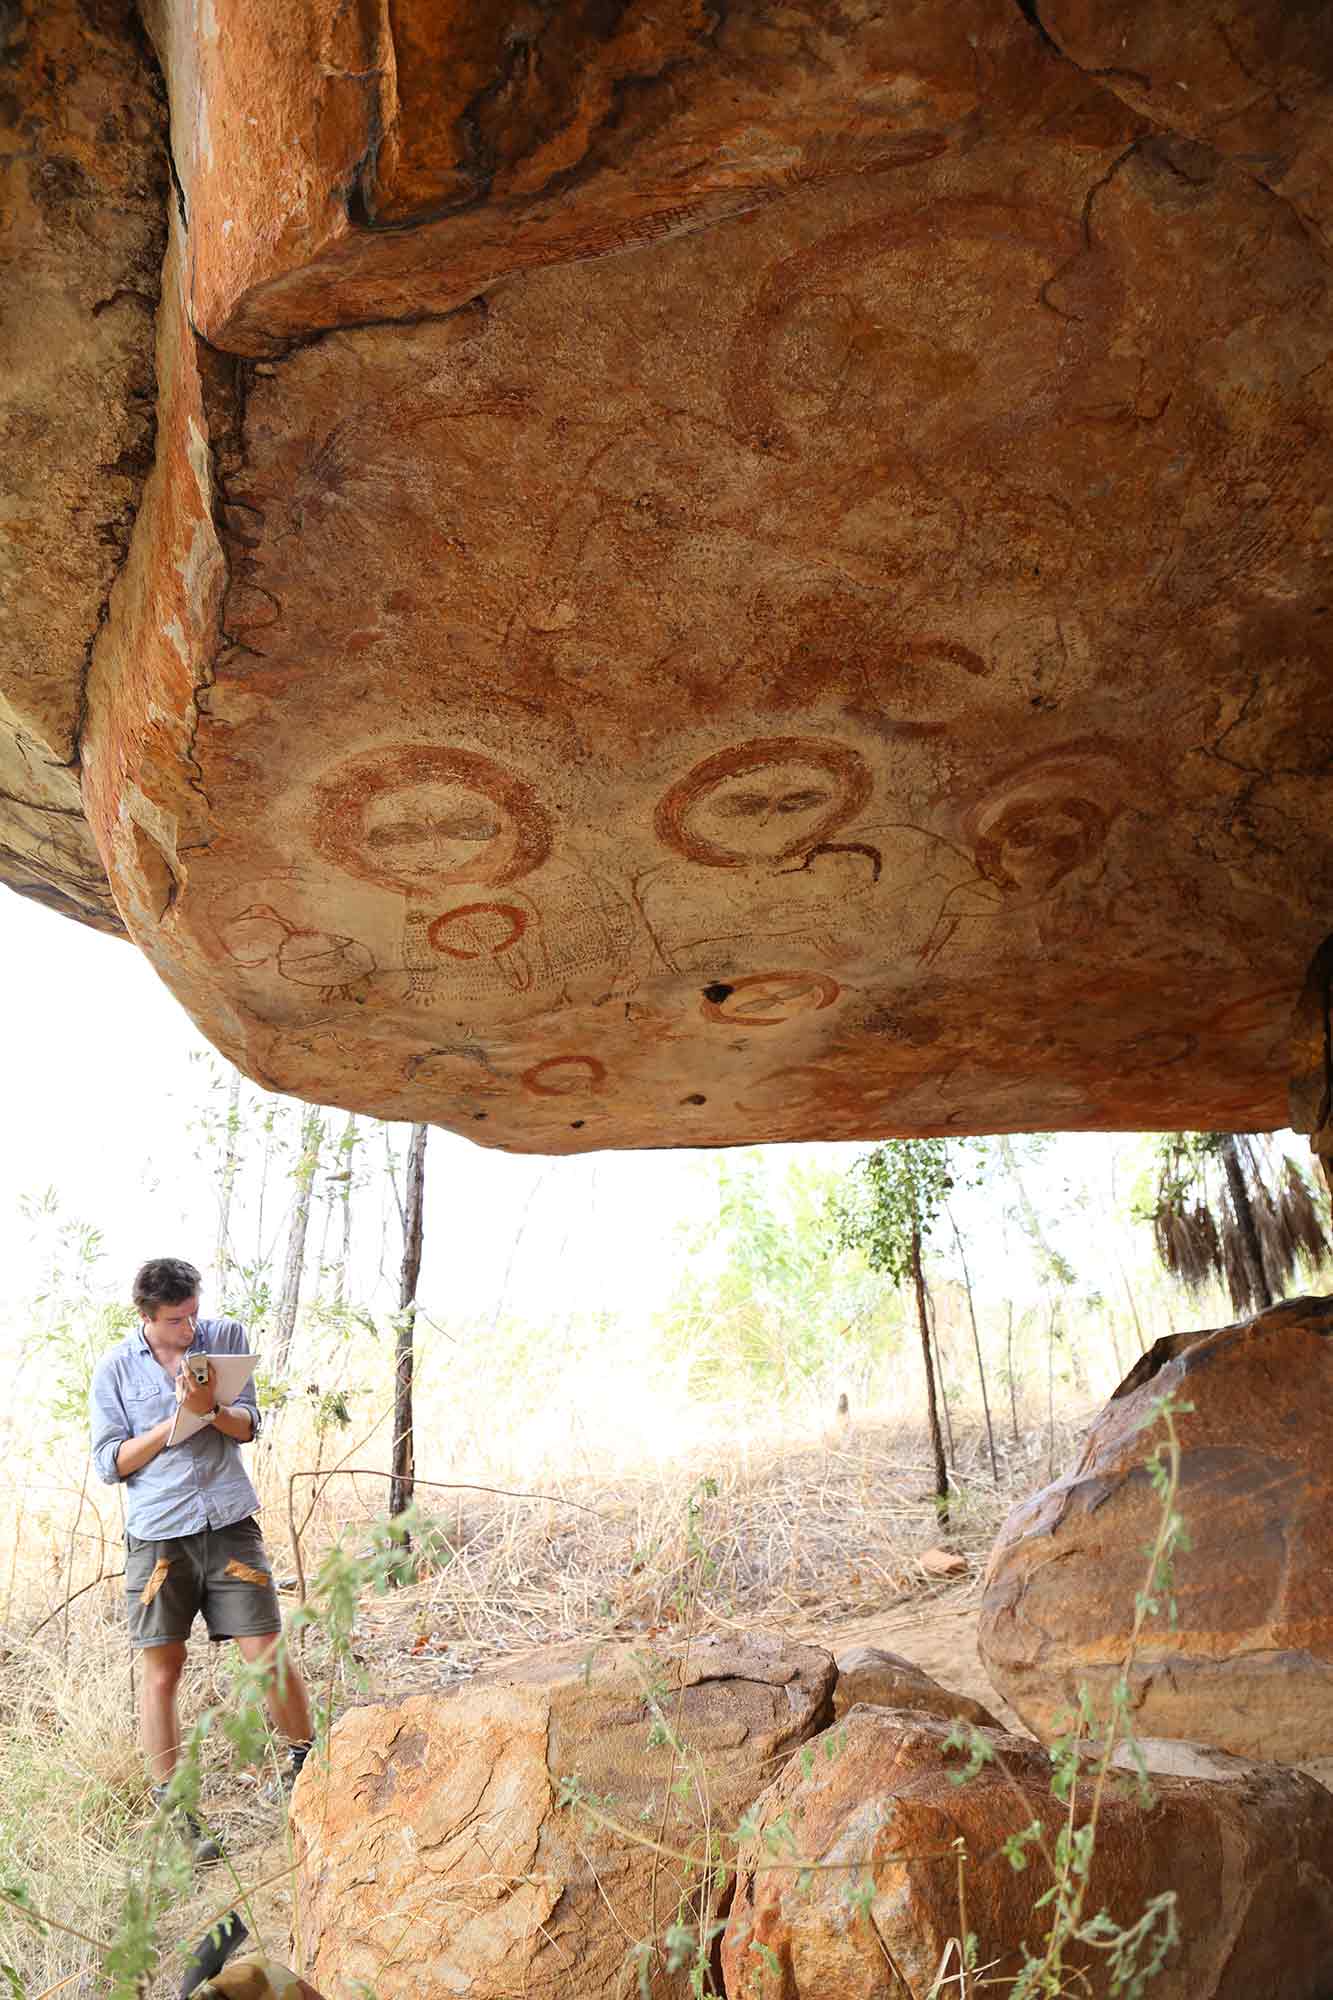 A man writes in a notebook at the entrance to a cave with rock art on the ceiling.  